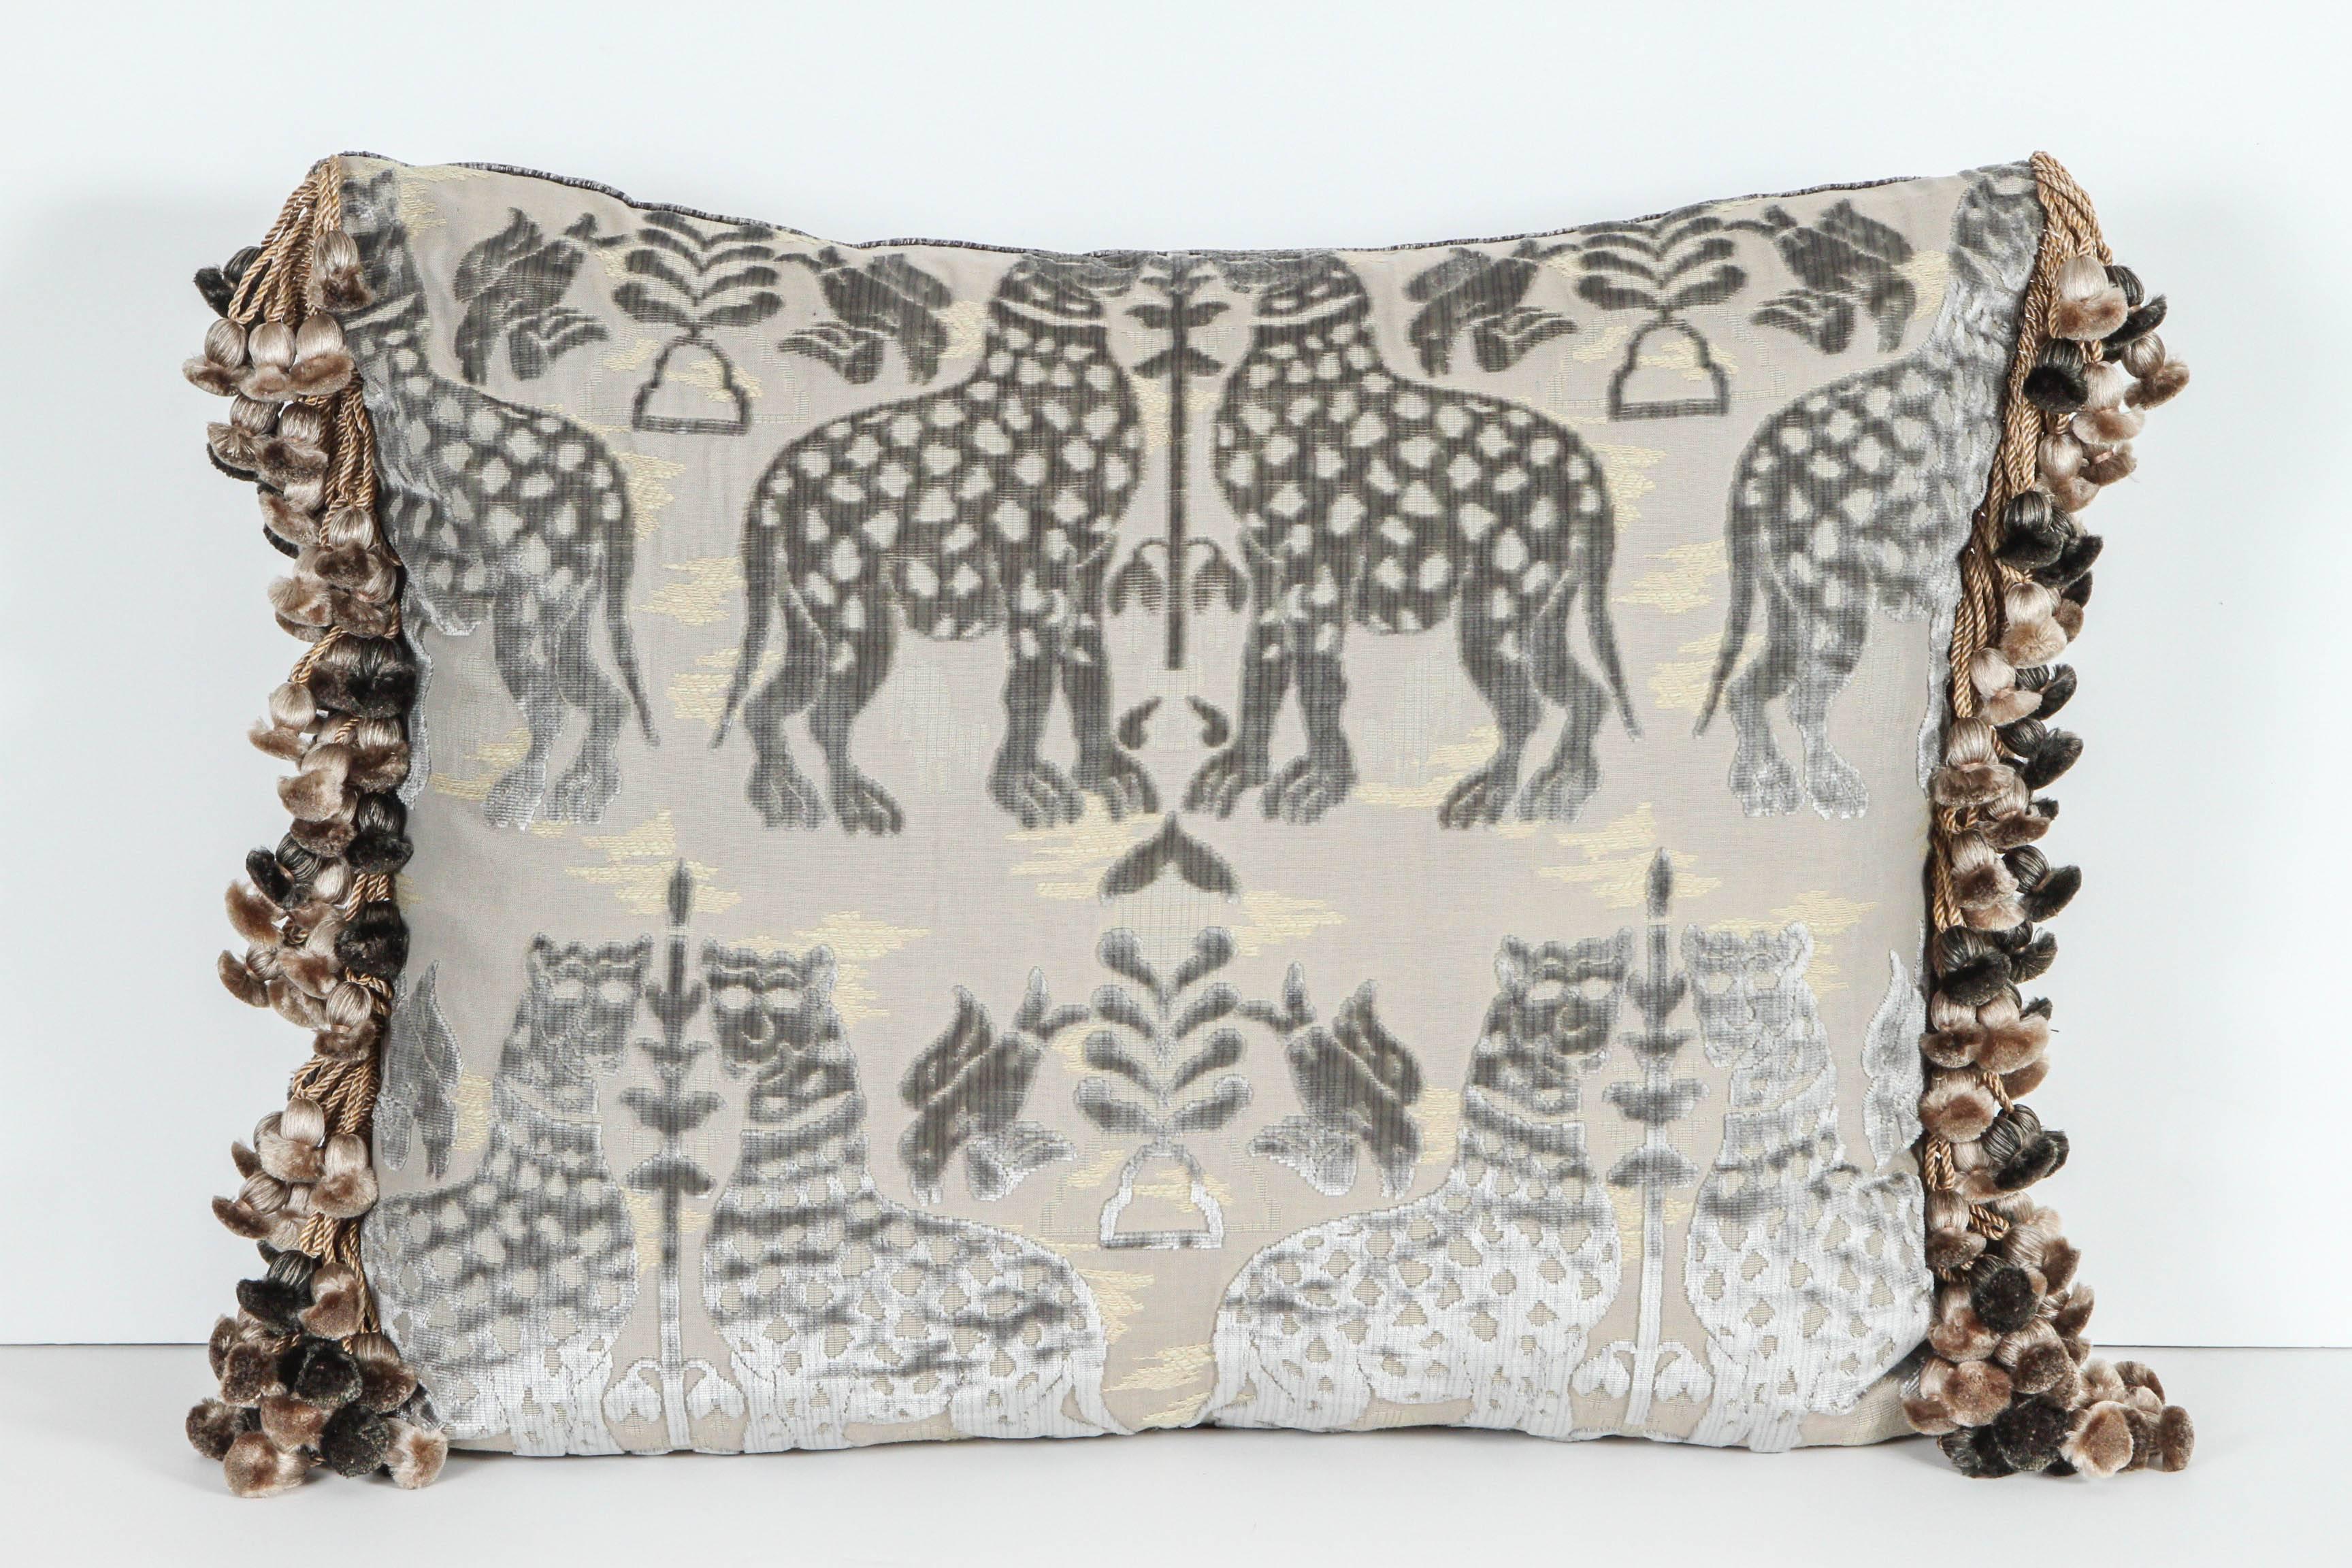 Pair of Luigi Bevilacqua cut silk velvet pillows with mythological theme including Animals and Birds. They are silvery gray with silk trim and silk velvet charcoal colored striae design backing. Featuring Janet Yonaty Silk tassel trim. The pillows